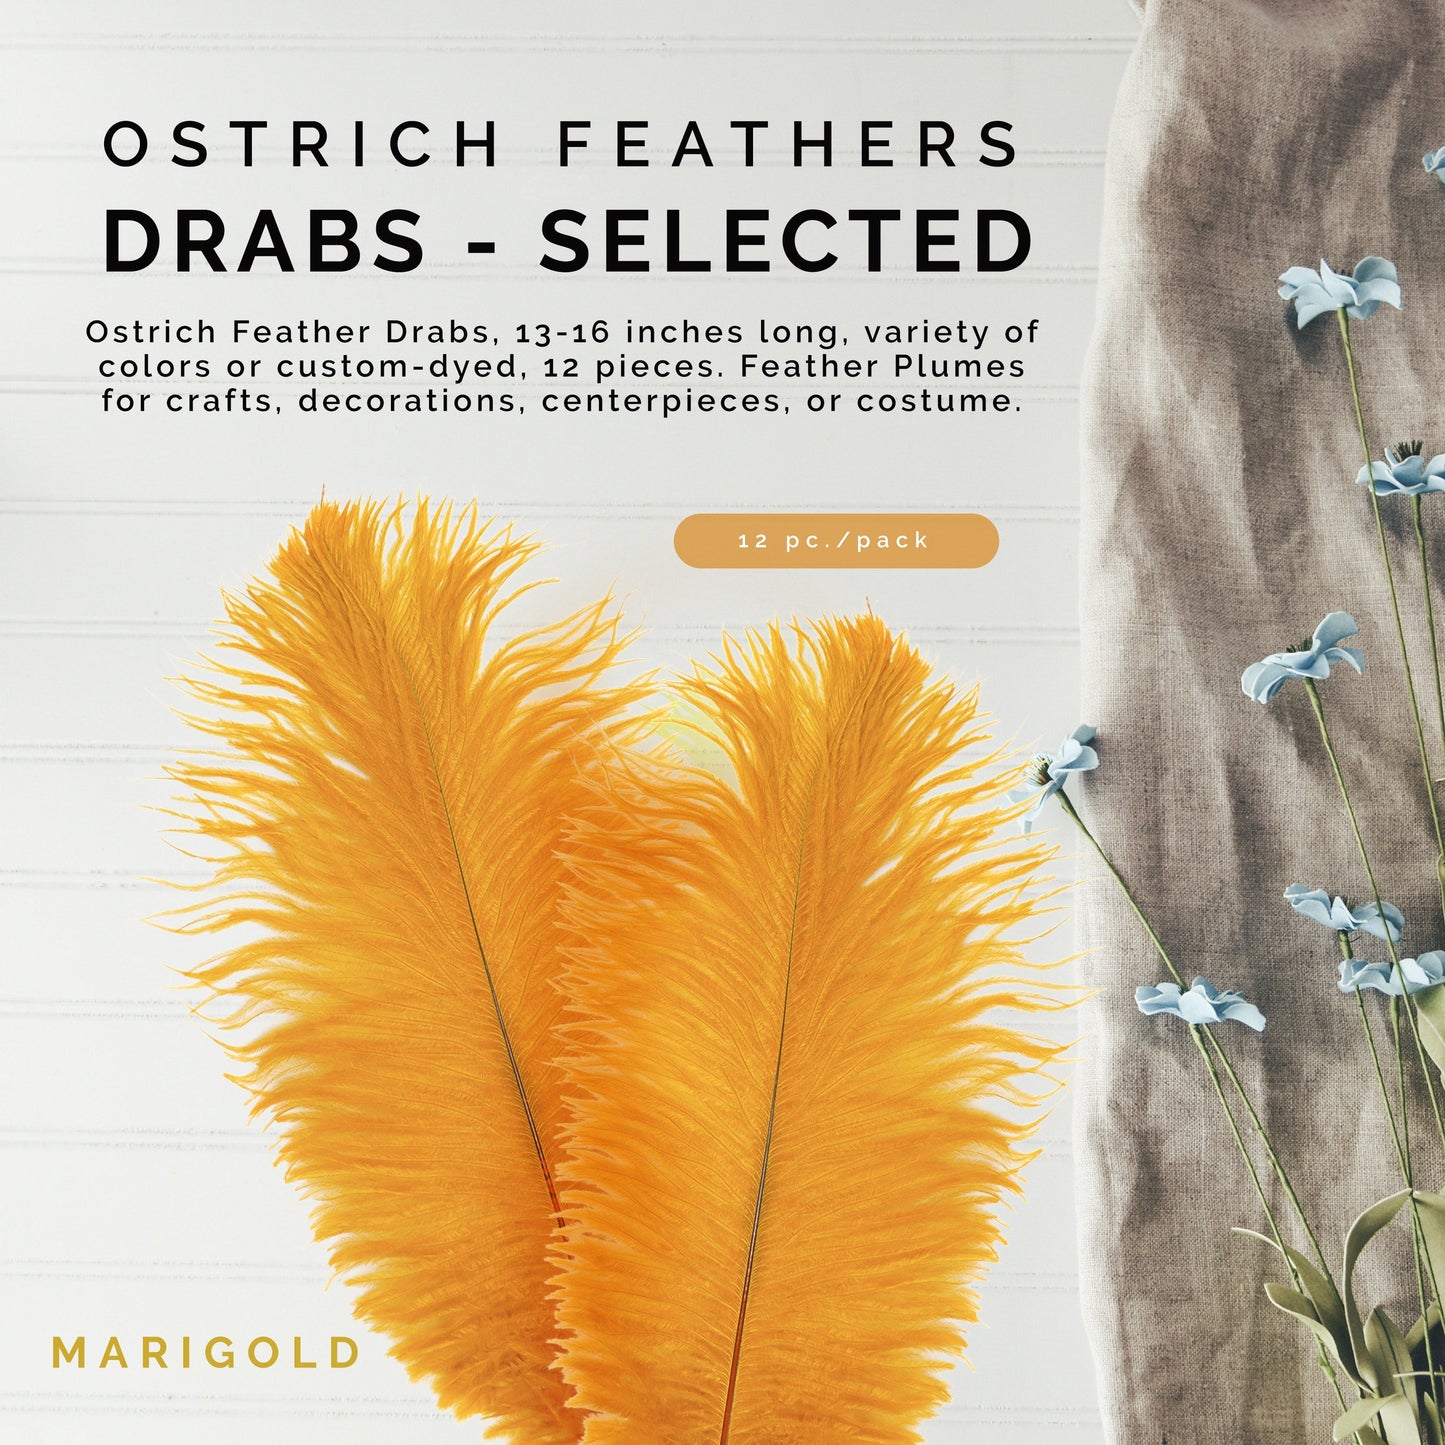 Ostrich Feathers 13-16" Drabs - Marigold